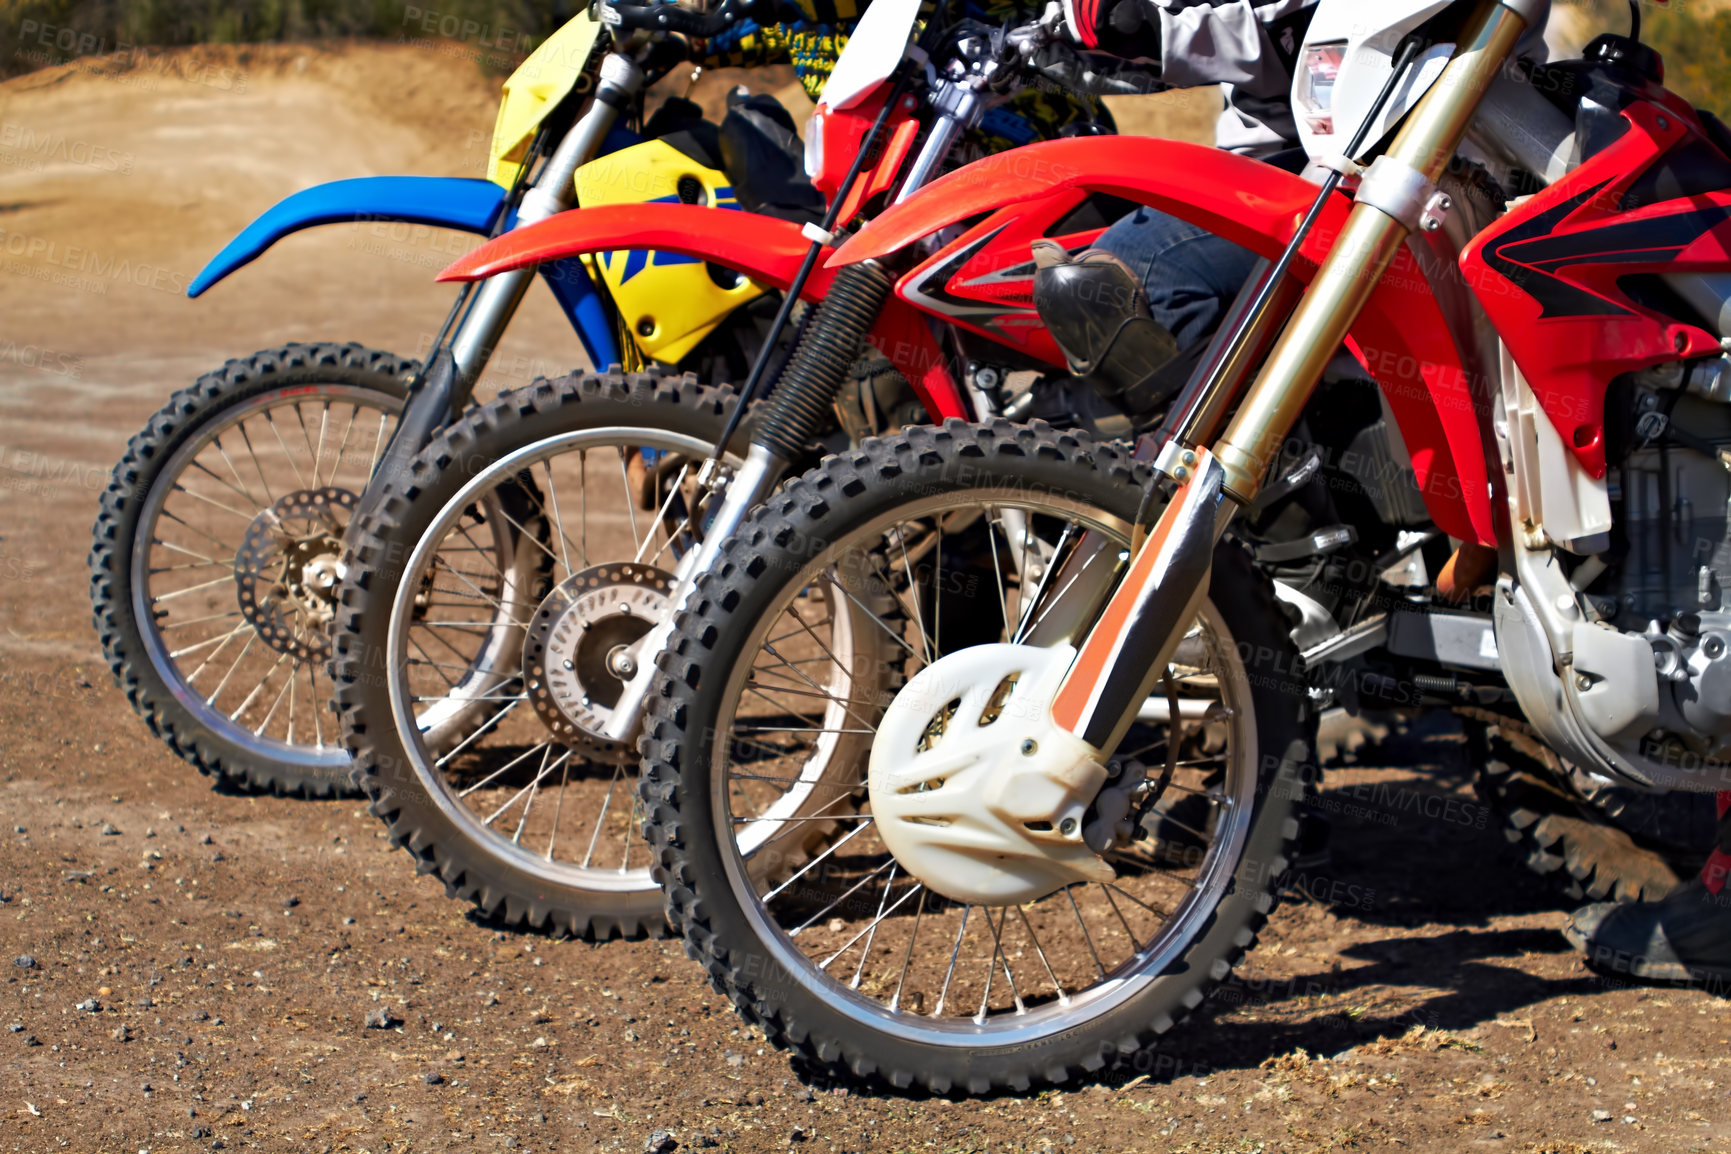 Buy stock photo Three dirt bikes standing in a row